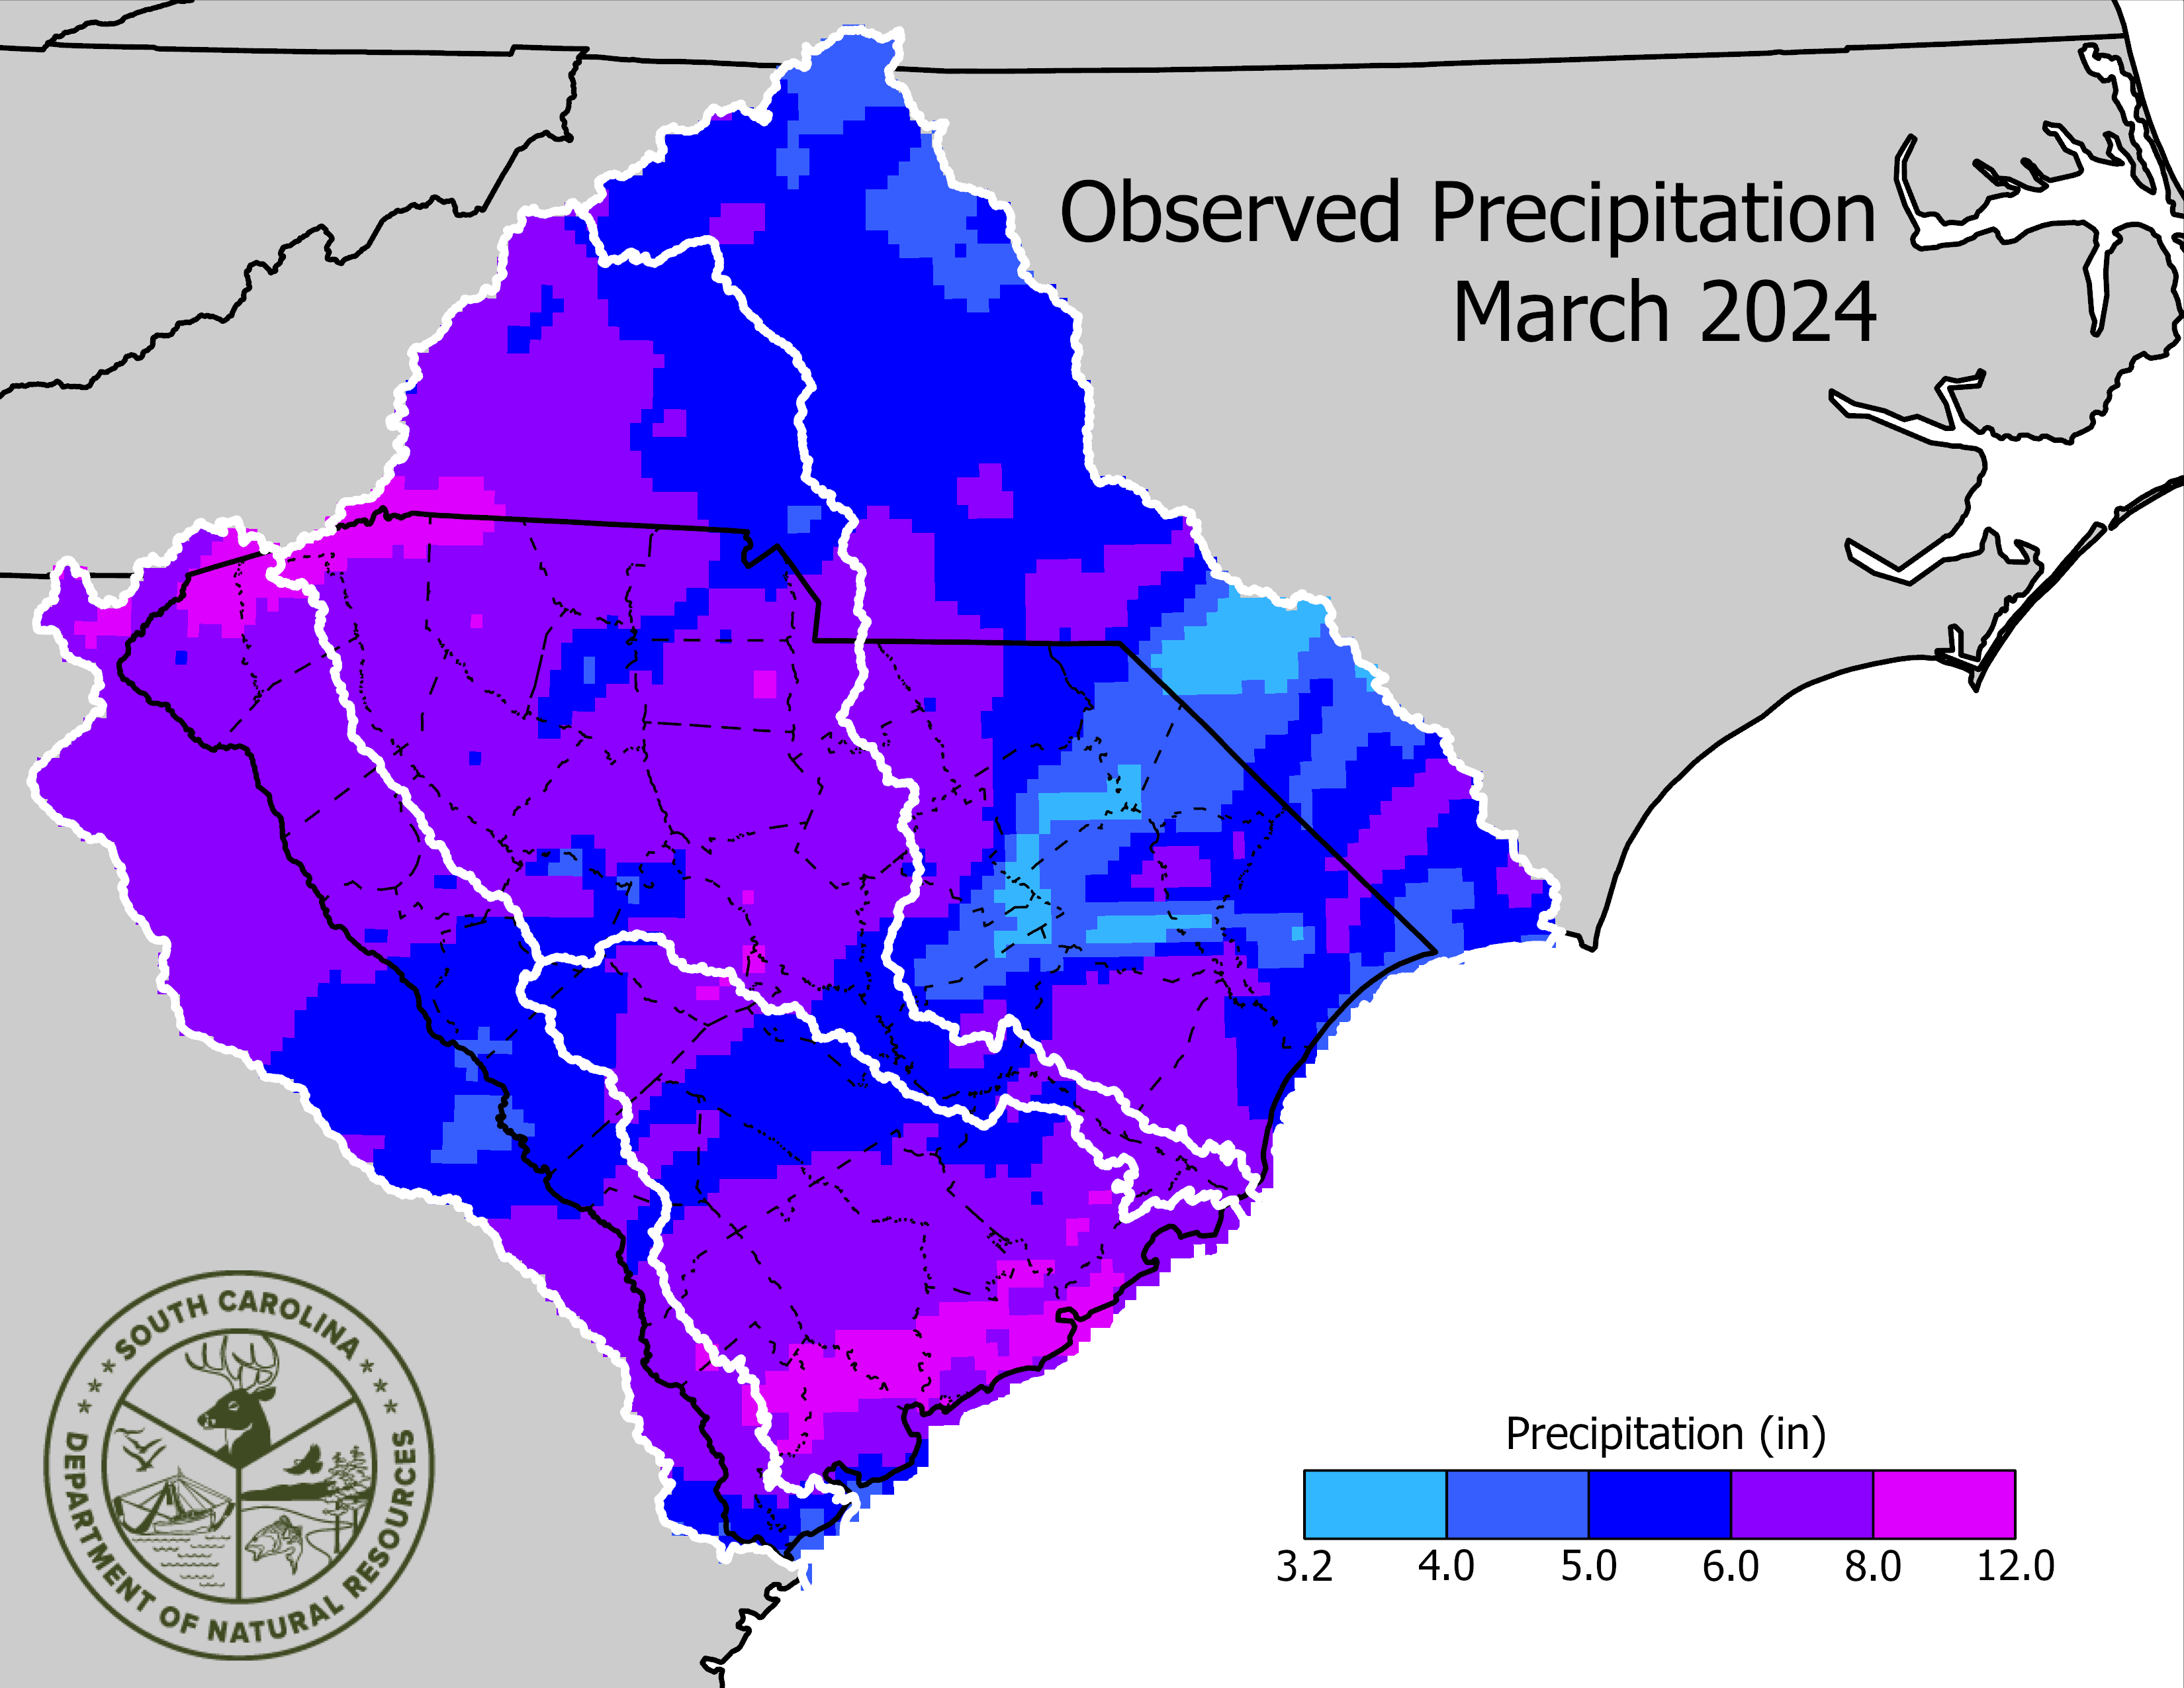 Thumbnail of observed precipitation for the previous month.